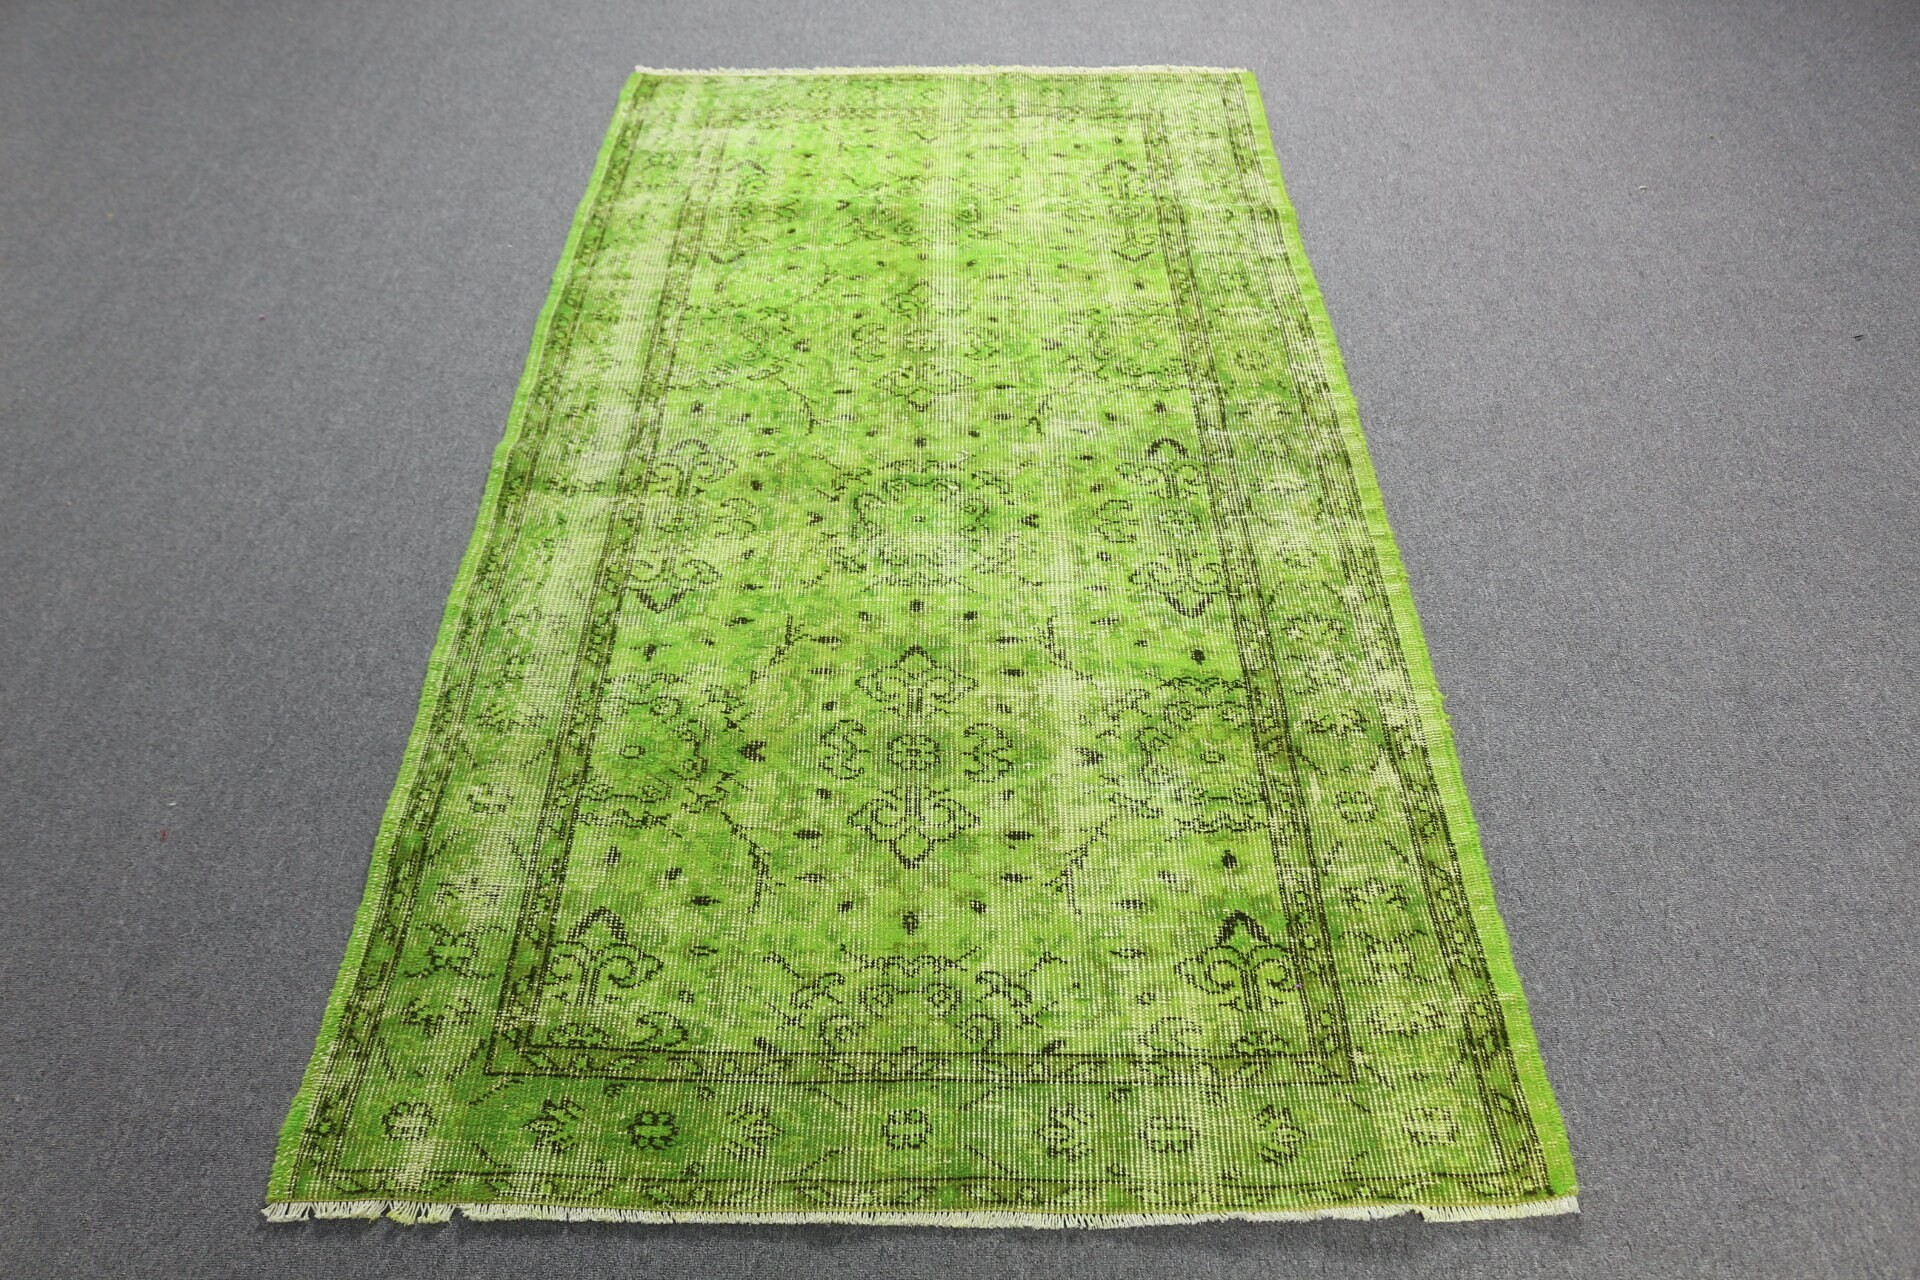 Turkish Rugs, Moroccan Rugs, 3.7x6.8 ft Area Rugs, Home Decor Rug, Floor Rug, Vintage Rug, Green Kitchen Rugs, Rugs for Dining Room